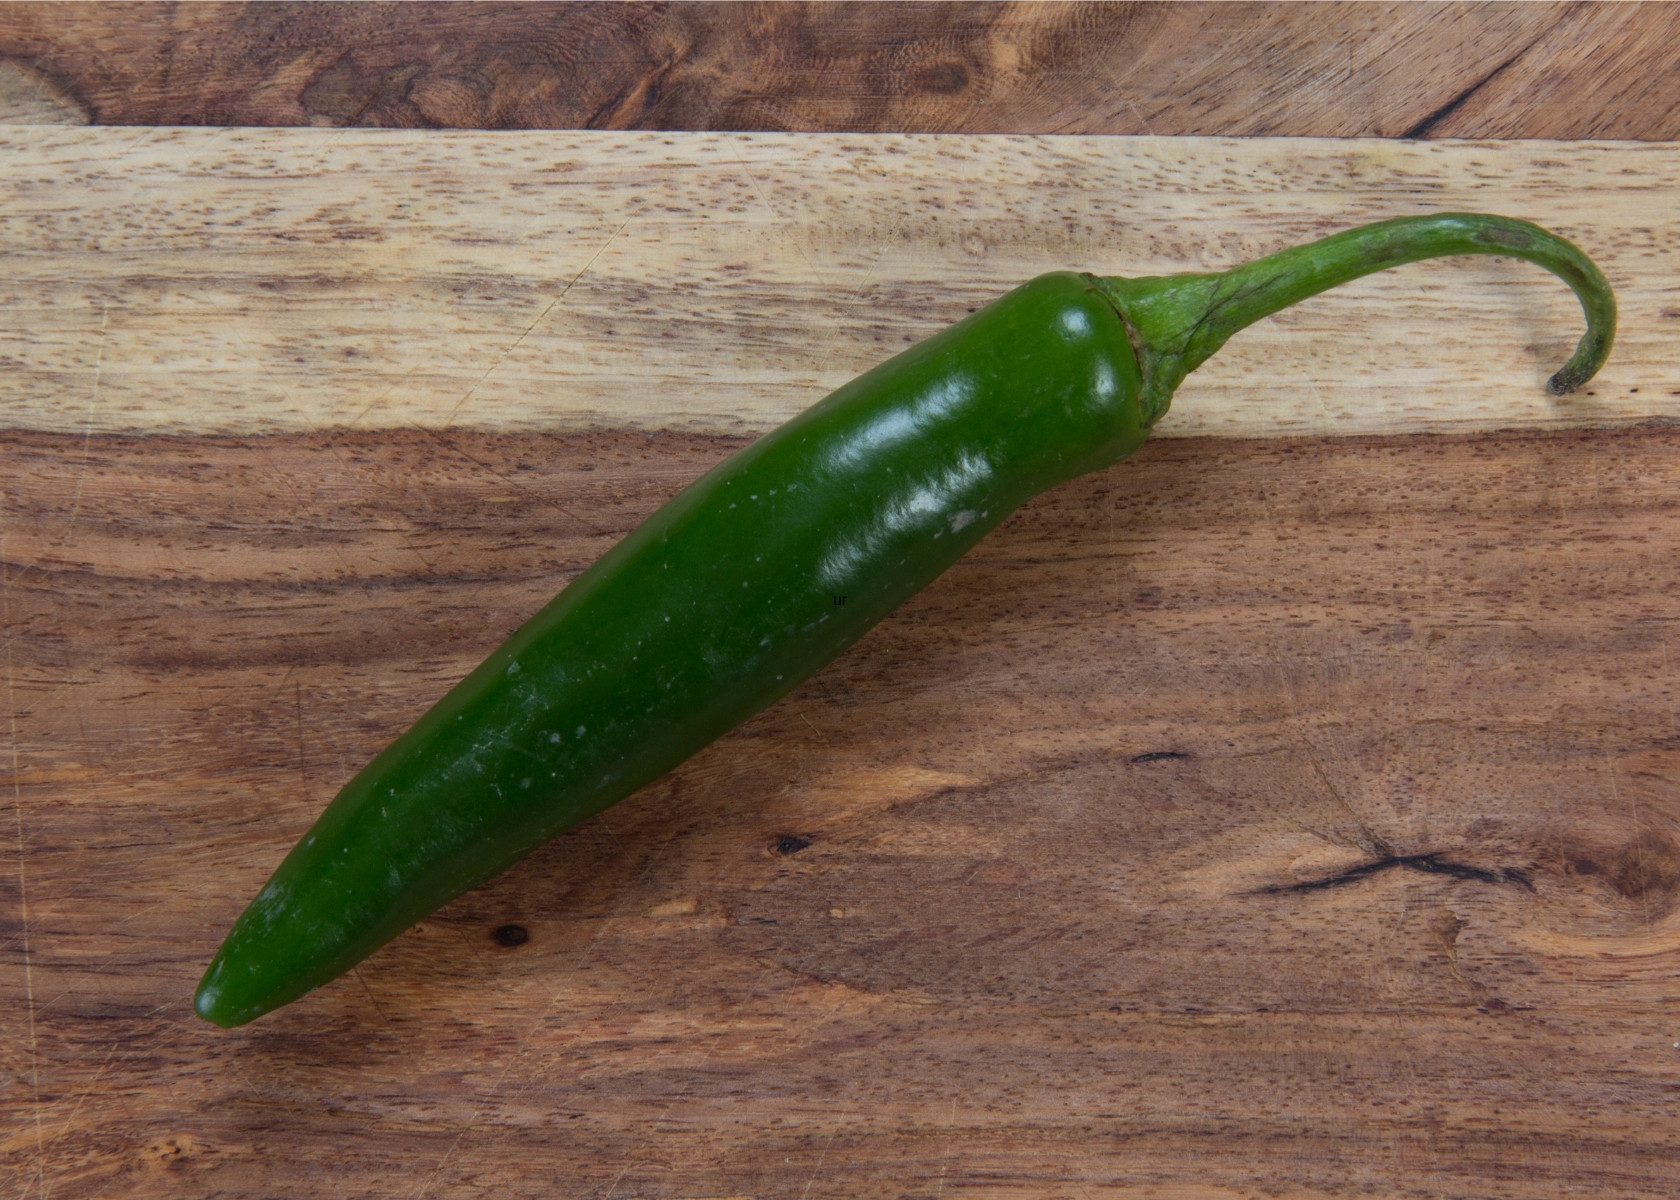 Large dark green serrano pepper with curved stem on rustic wooden cutting board.